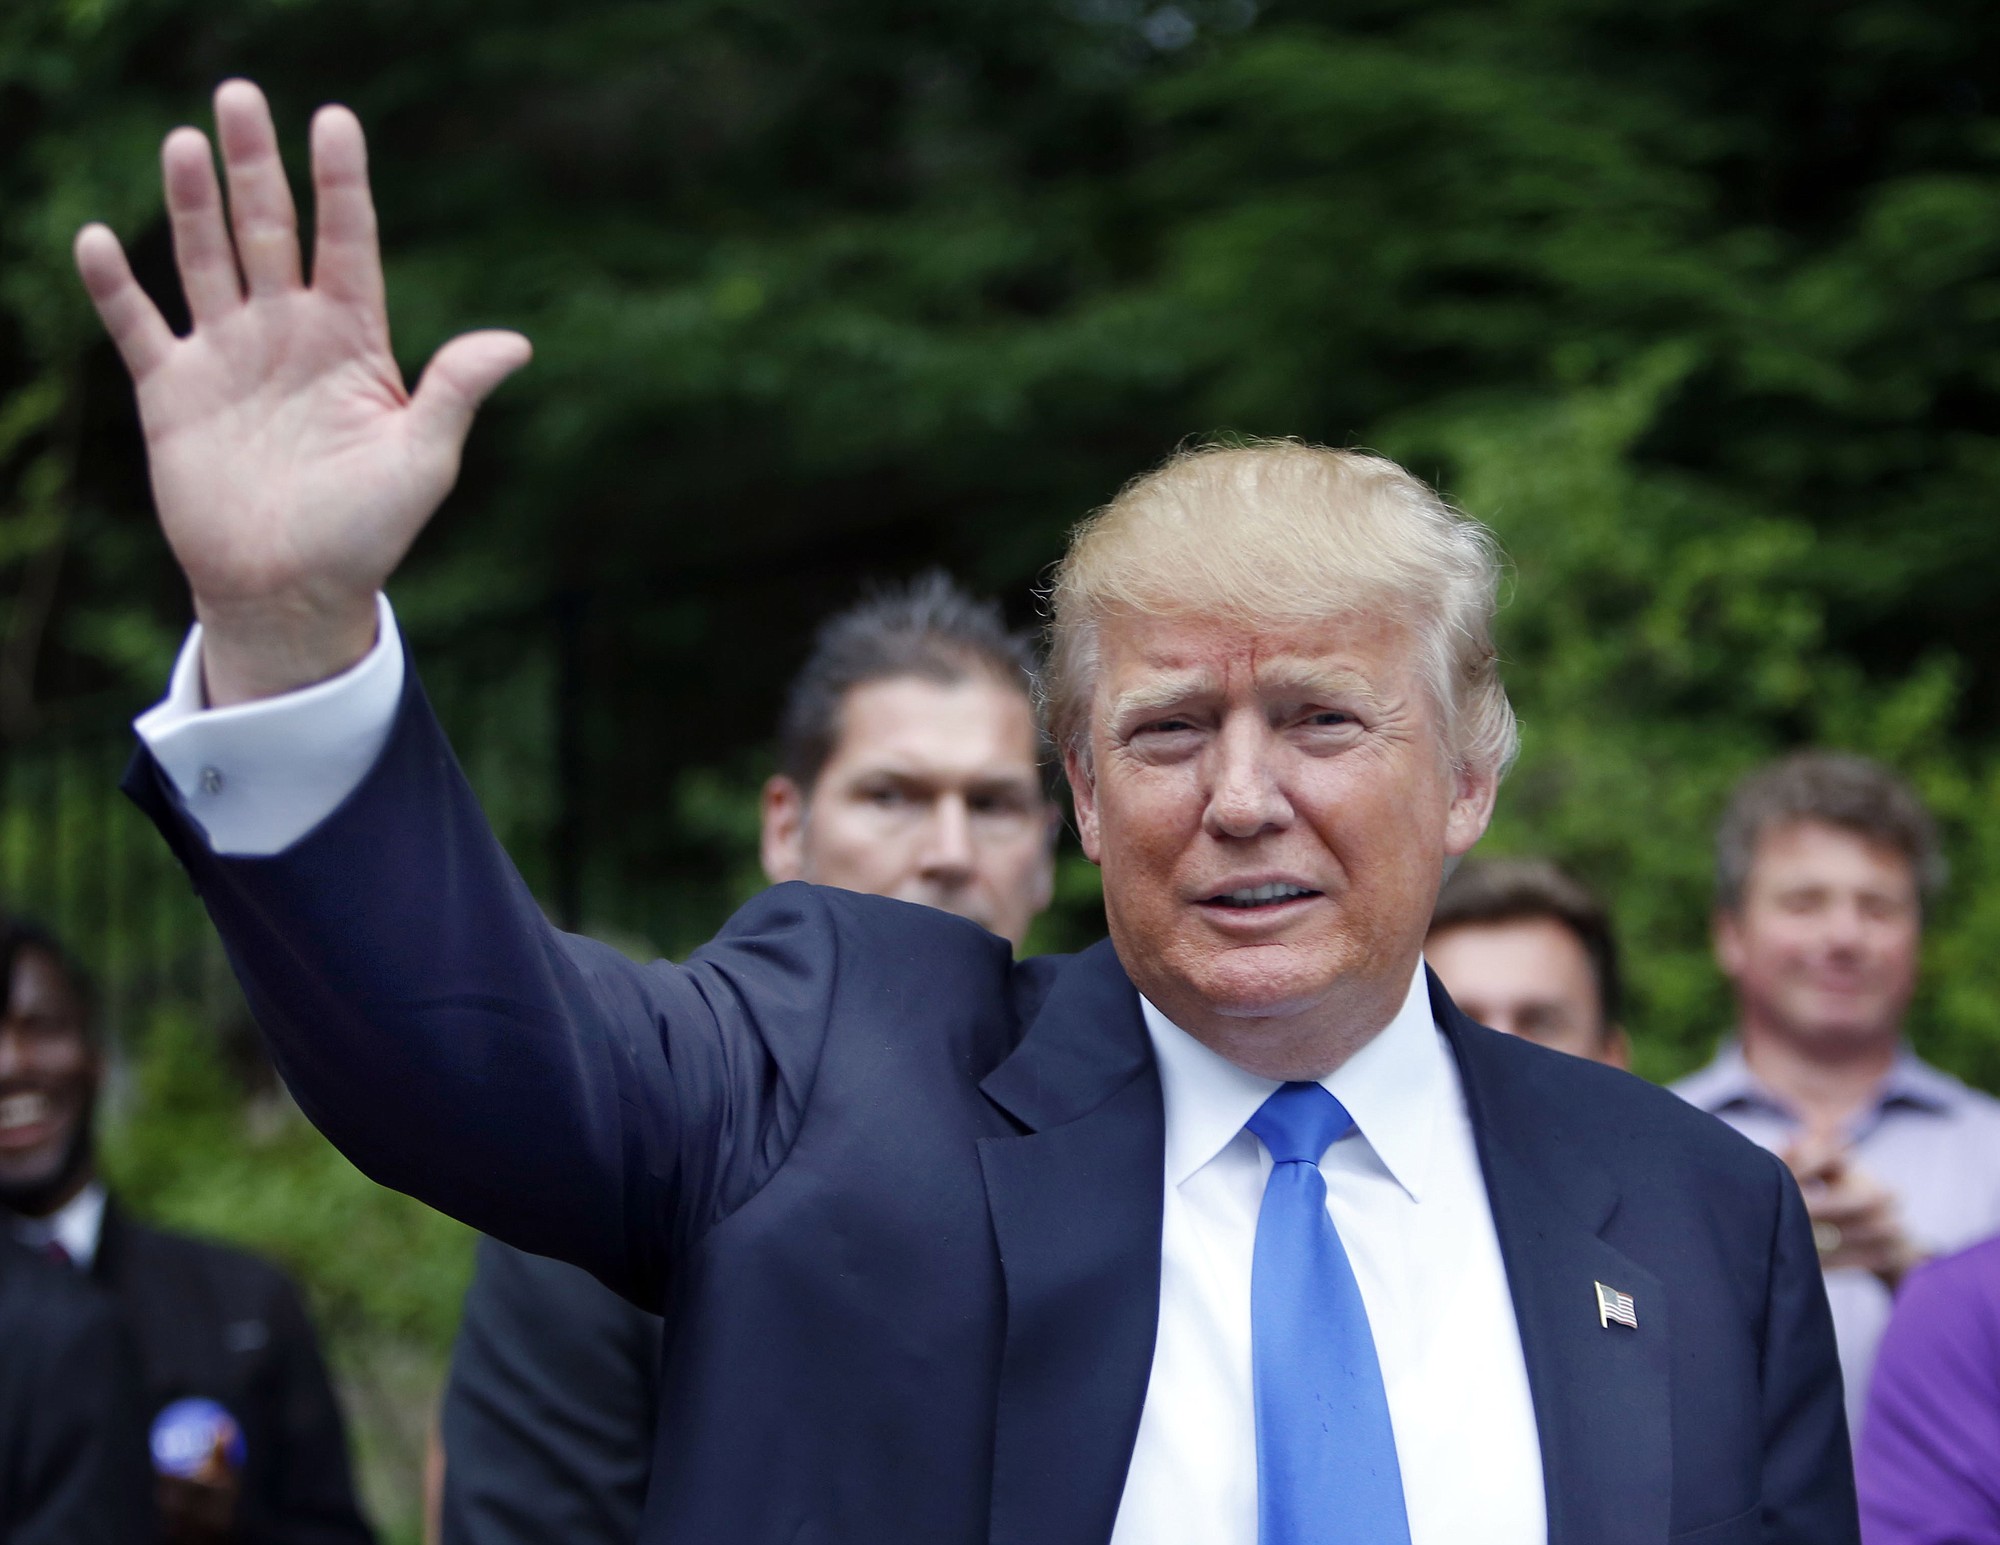 Republican presidential candidate Donald Trump waves as he arrives at a house party in Bedford, N.H.